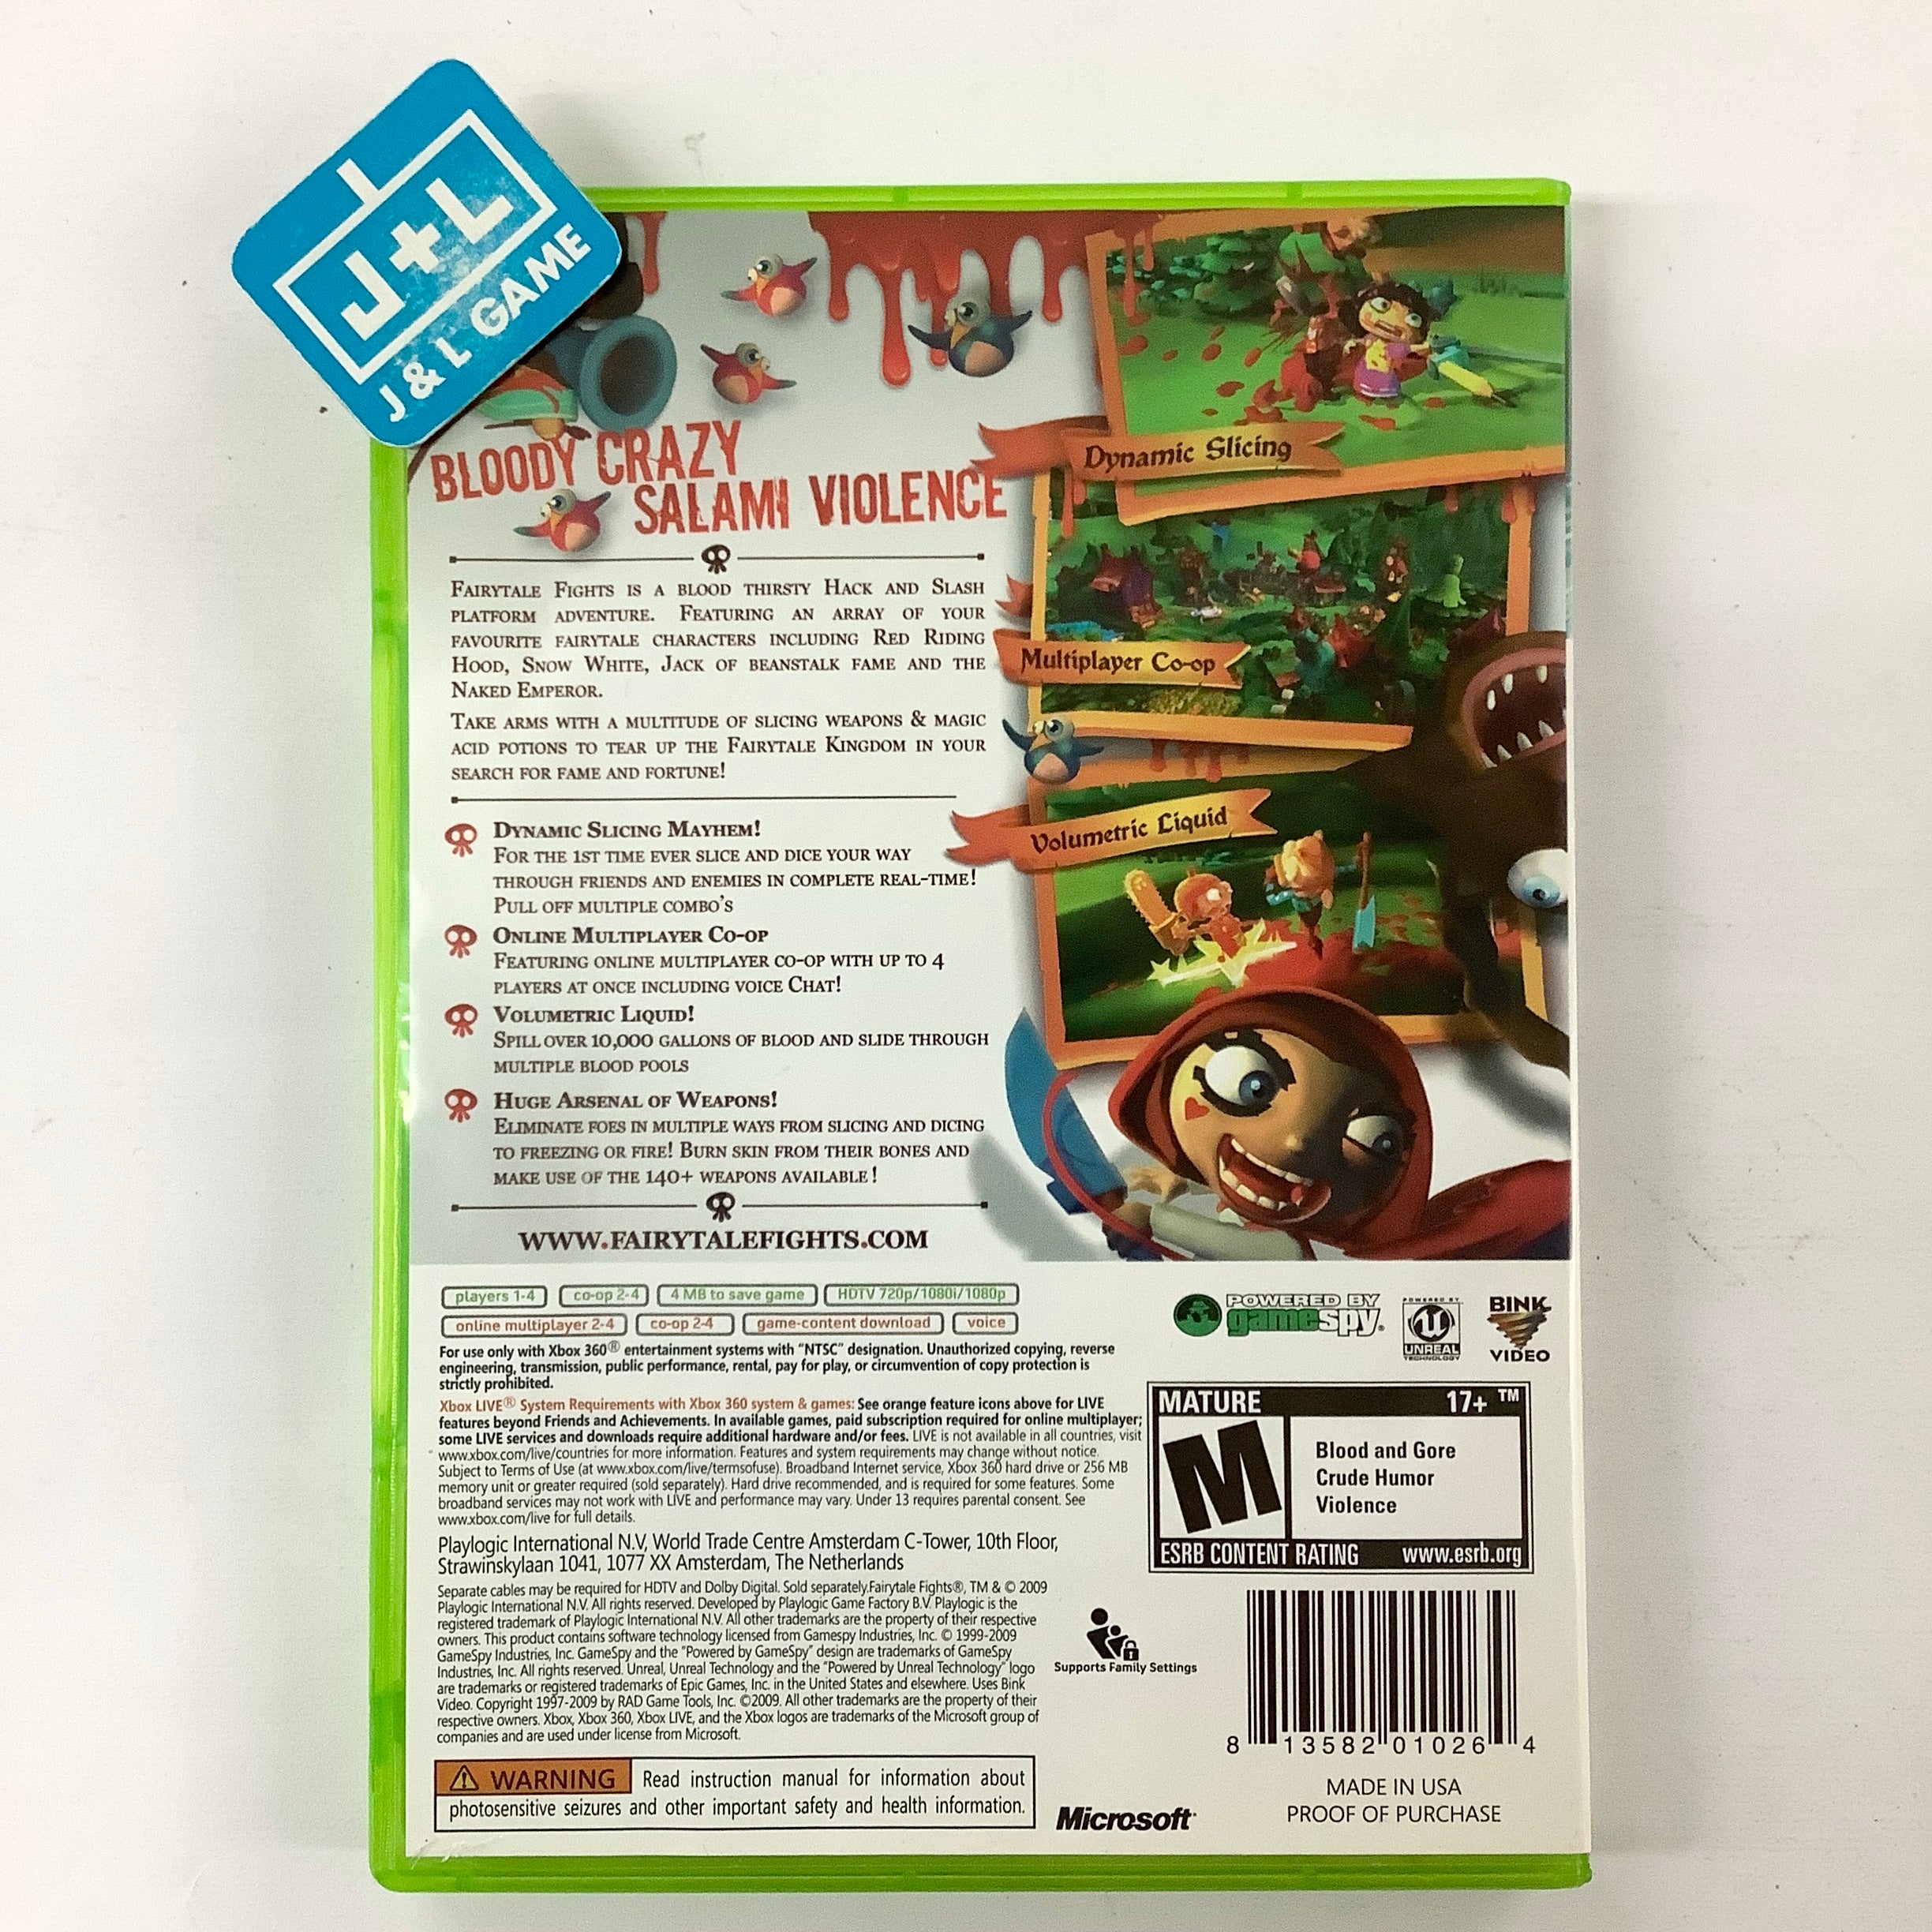 Fairytale Fights - Xbox 360 [Pre-Owned] Video Games Playlogic   